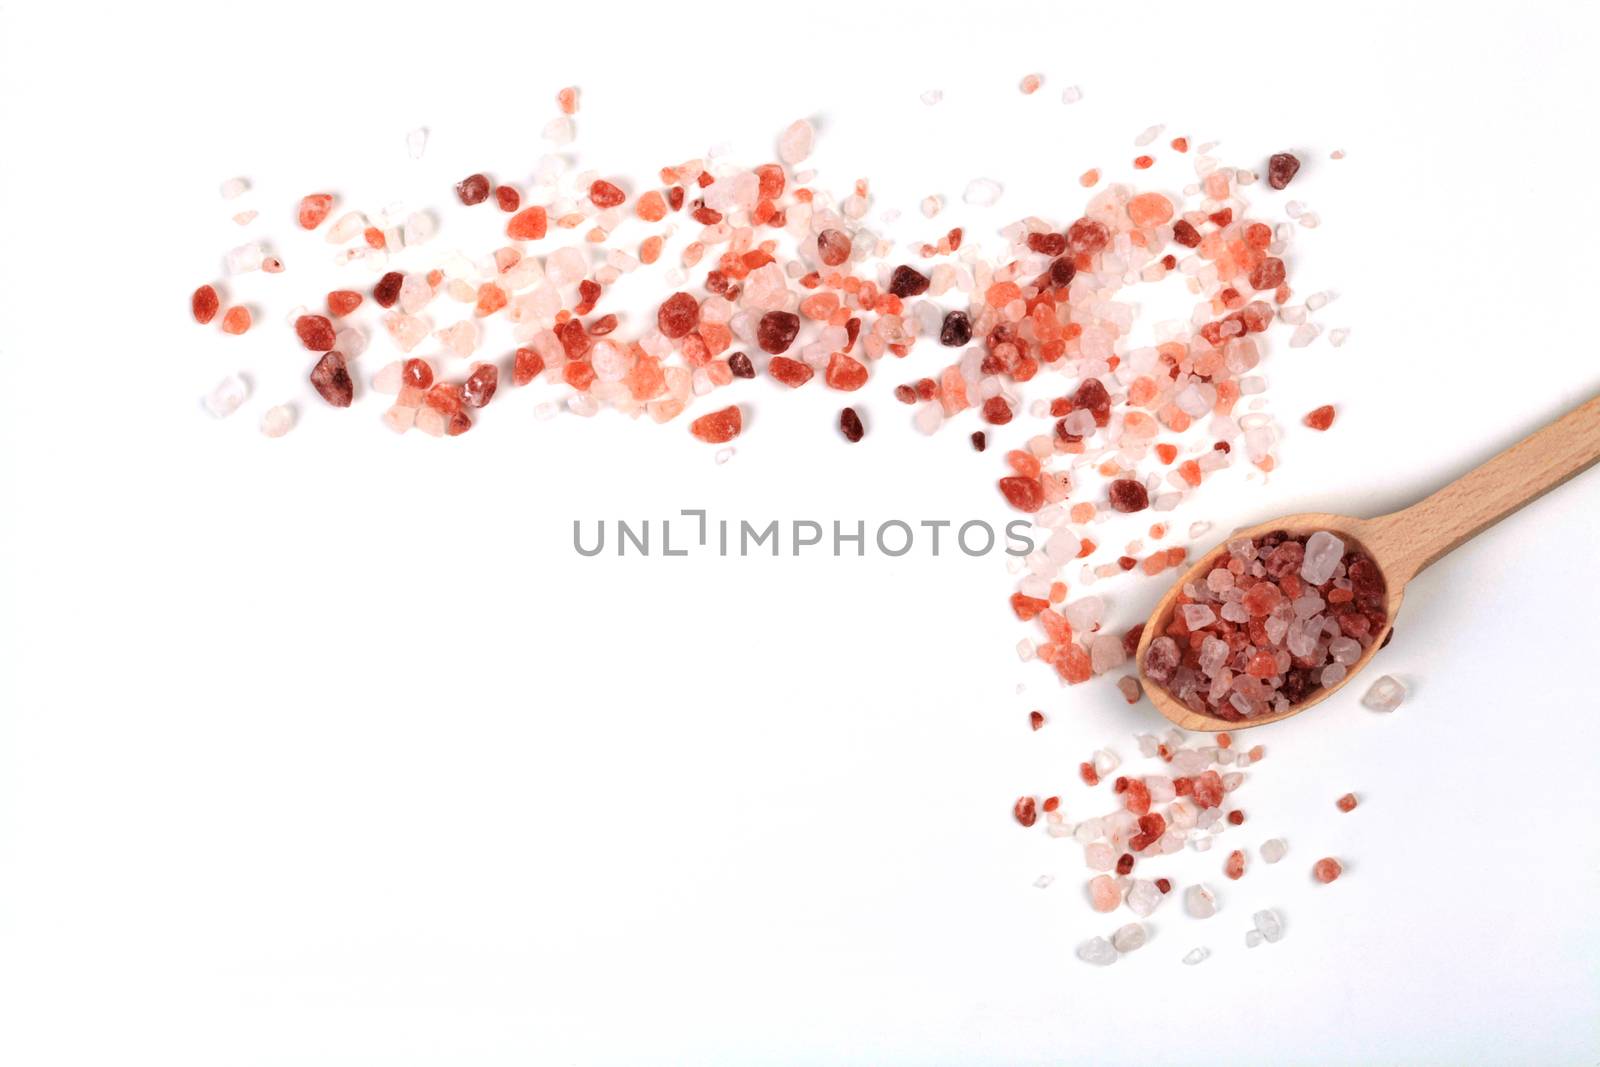 Himalayan Salt Cristals Frame With Brown Wood Spoon Isolated on White Background